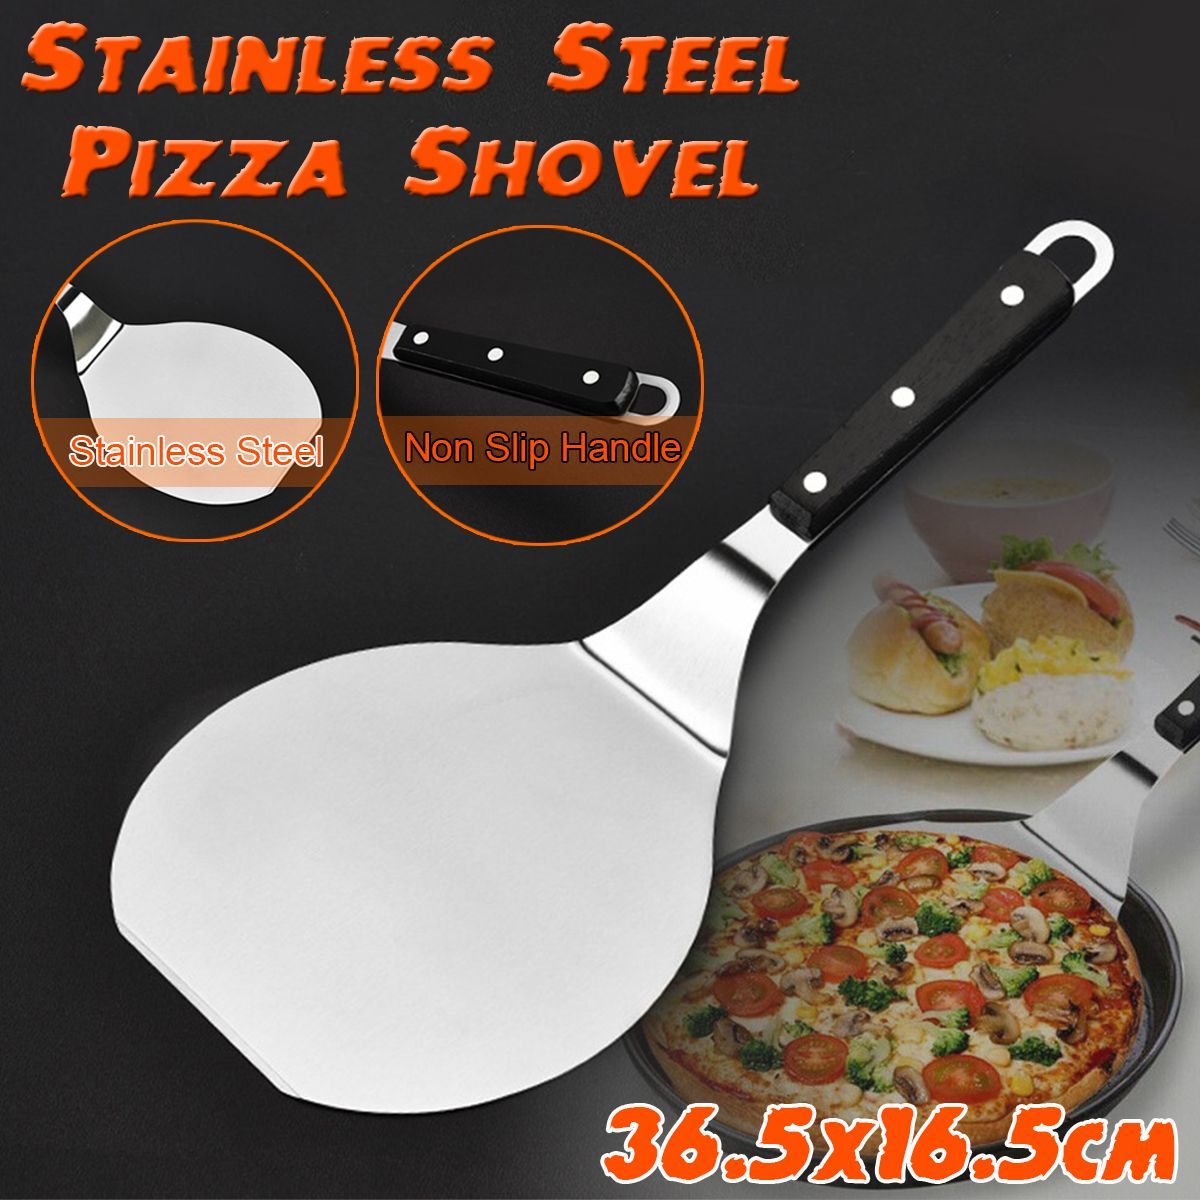 14-Stainless-Steel-Pizza-Frying-Peel-Lifter-Shovel-Spatula-Paddle-Bake-Tray-1706143